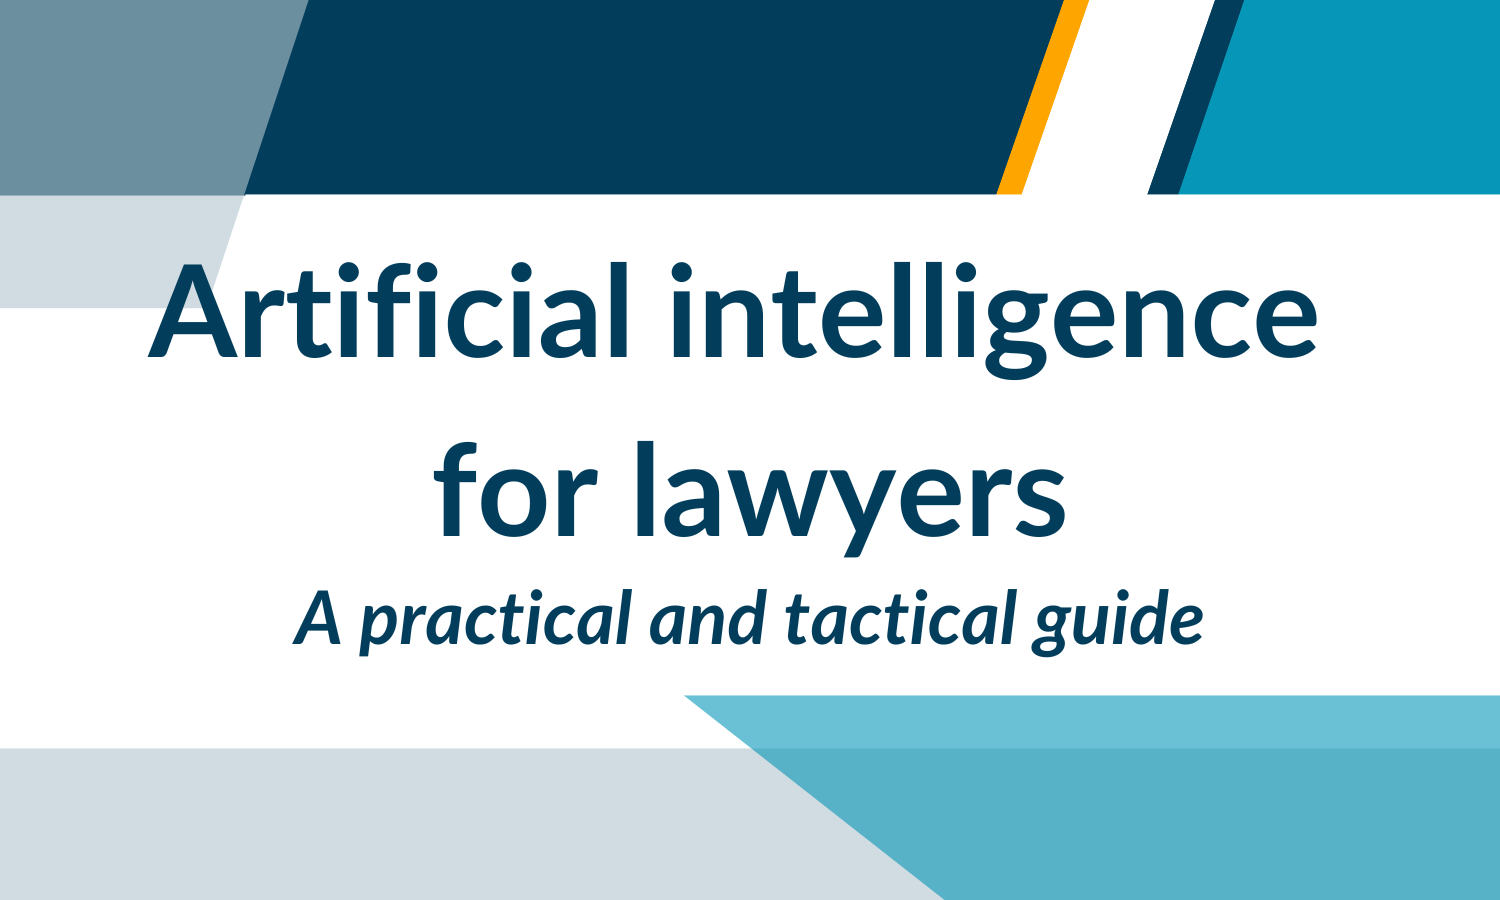 Artificial intelligence for lawyers: a practical and tactical guide